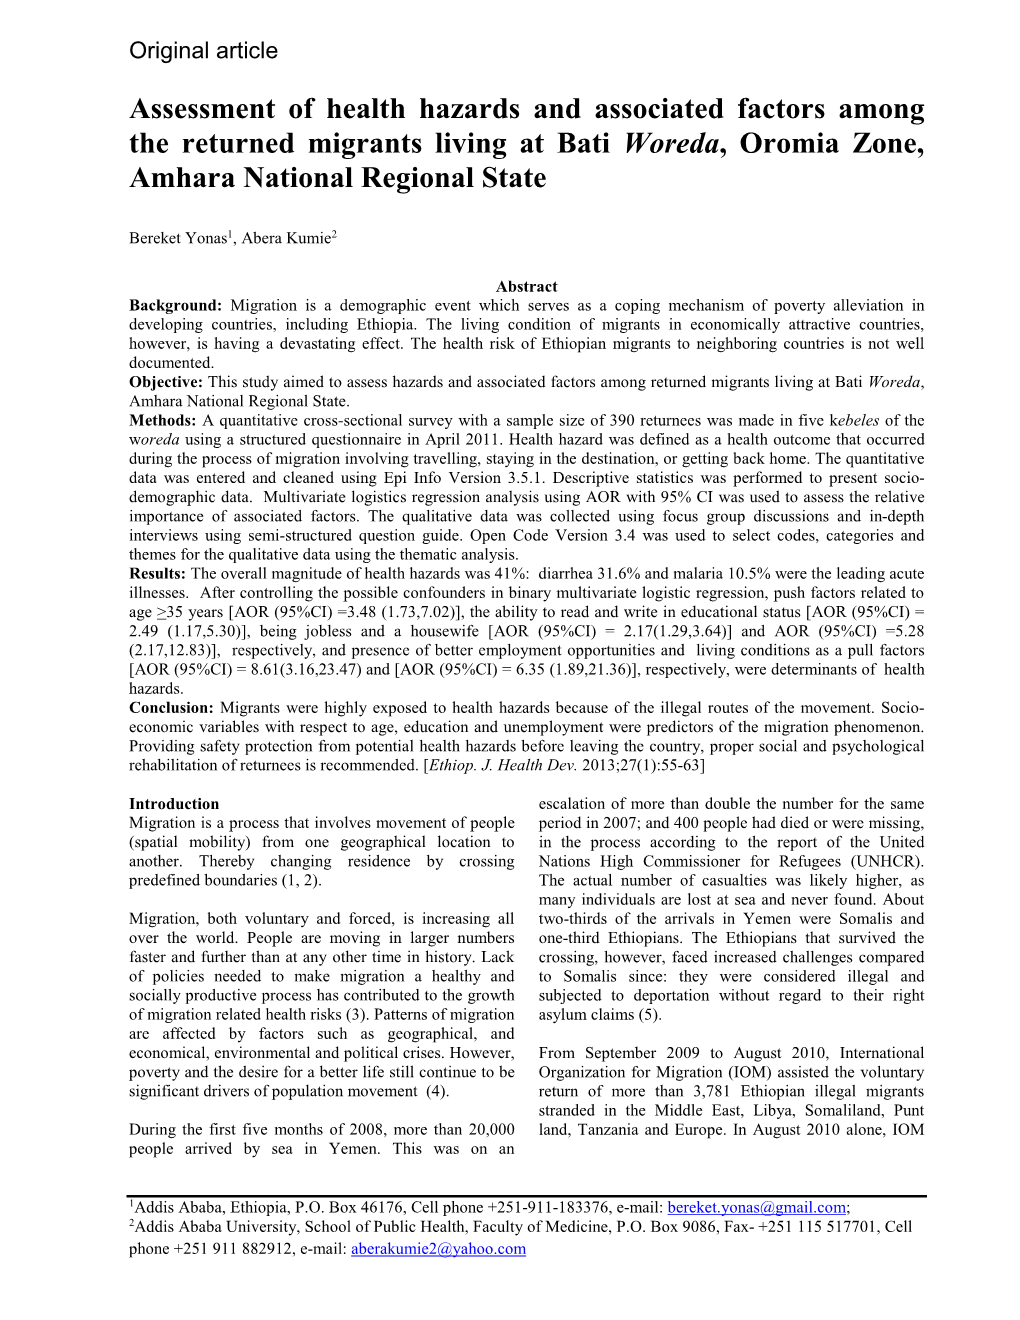 Assessment of Health Hazards and Associated Factors Among the Returned Migrants Living at Bati Woreda, Oromia Zone, Amhara National Regional State